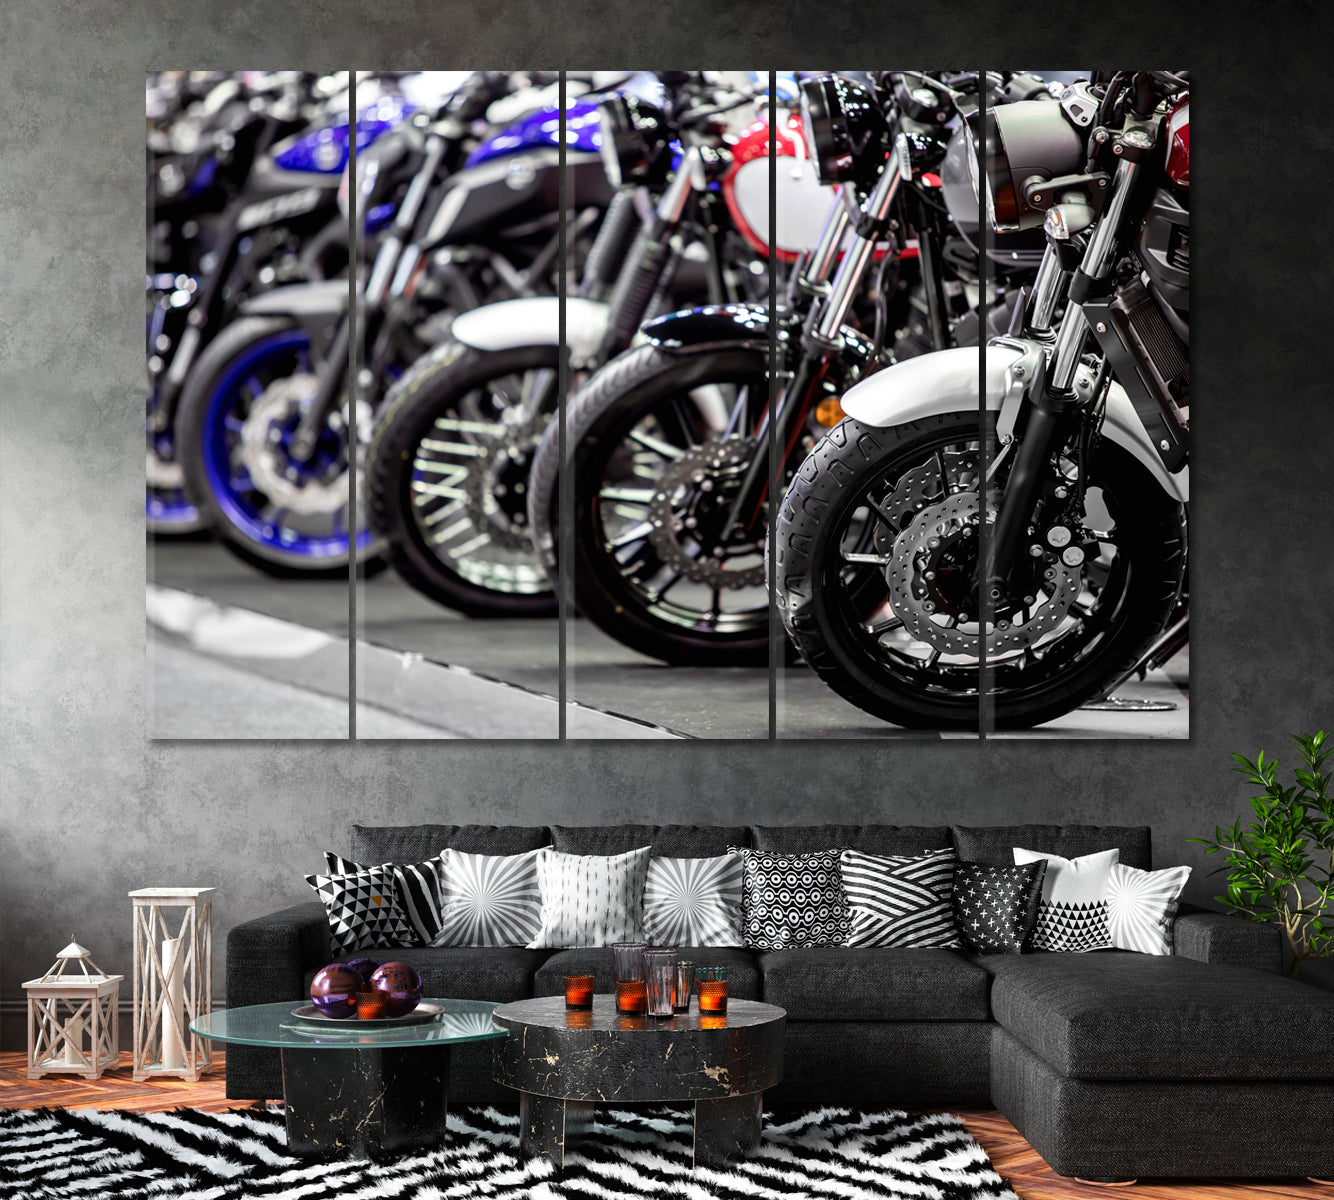 Motorcycles front Wheels Canvas Print ArtLexy 5 Panels 36"x24" inches 